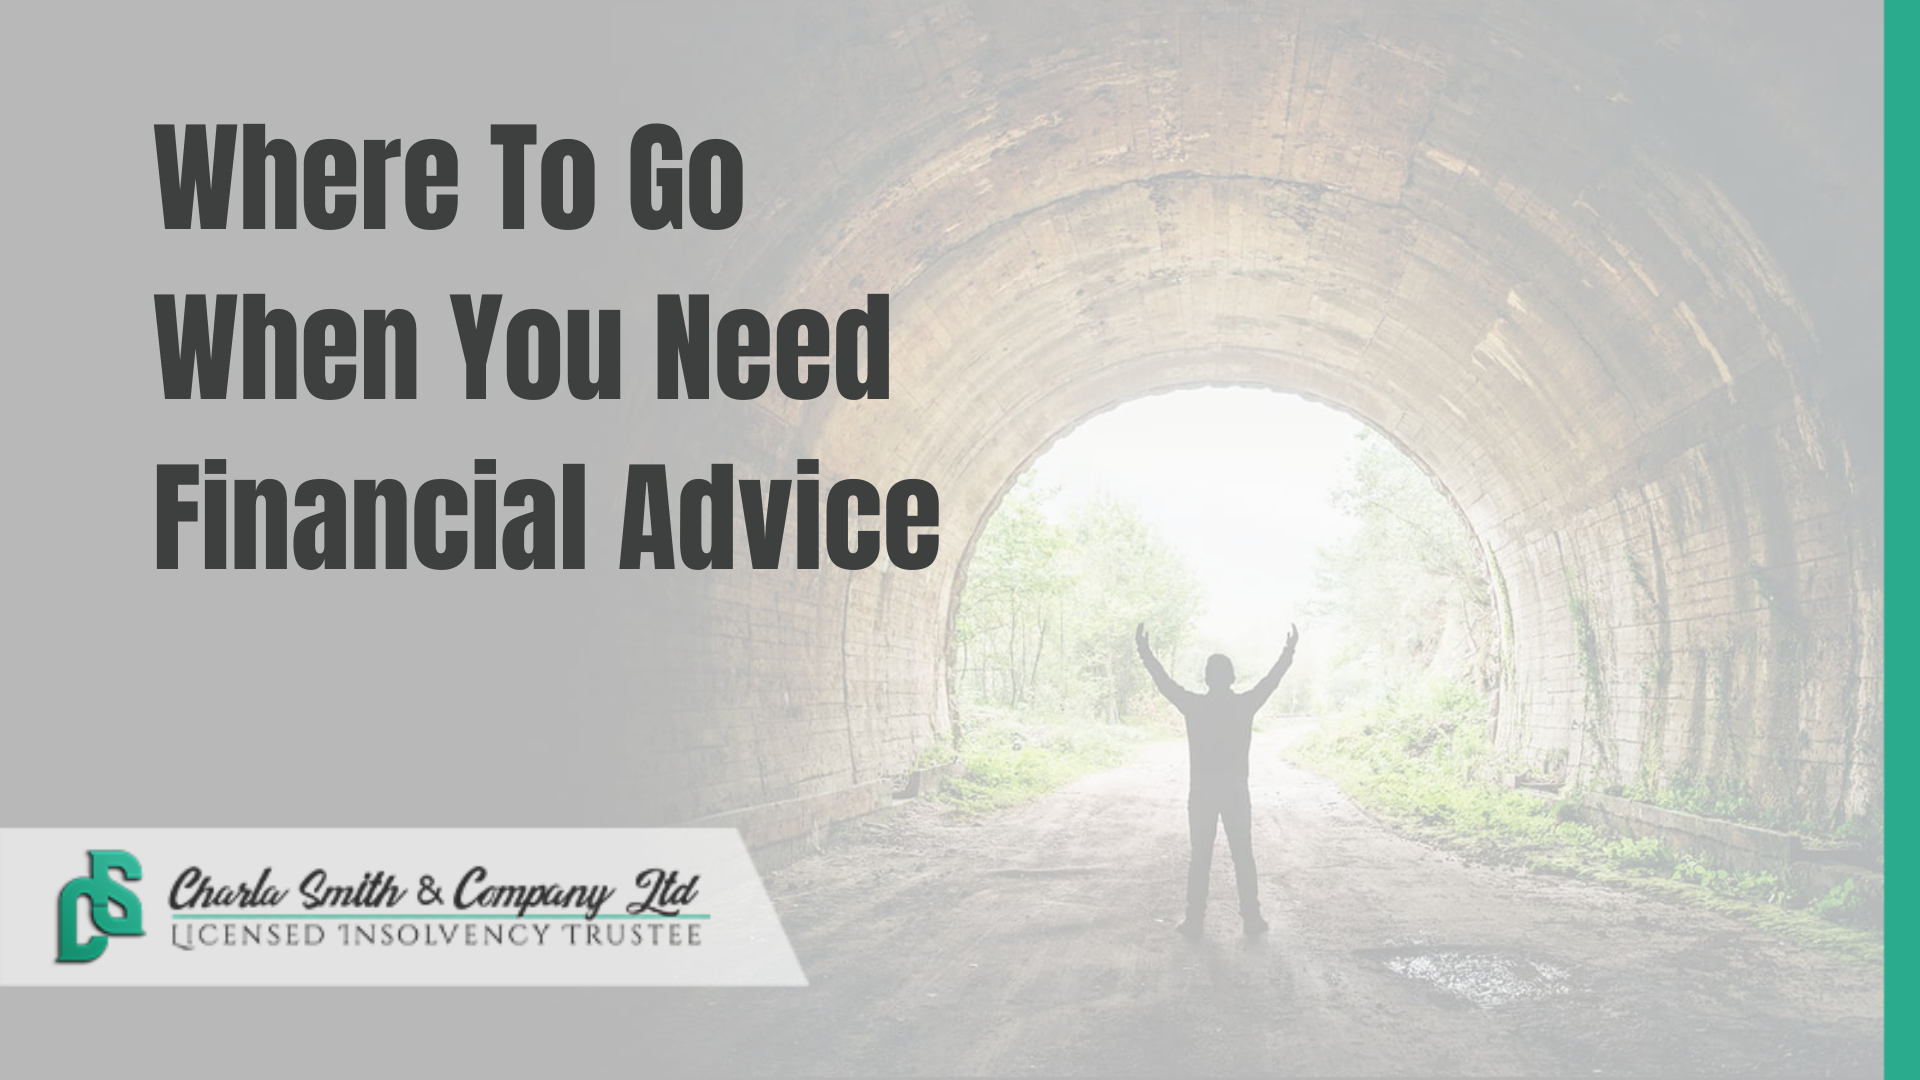 Where To Go When You Need Financial Advice